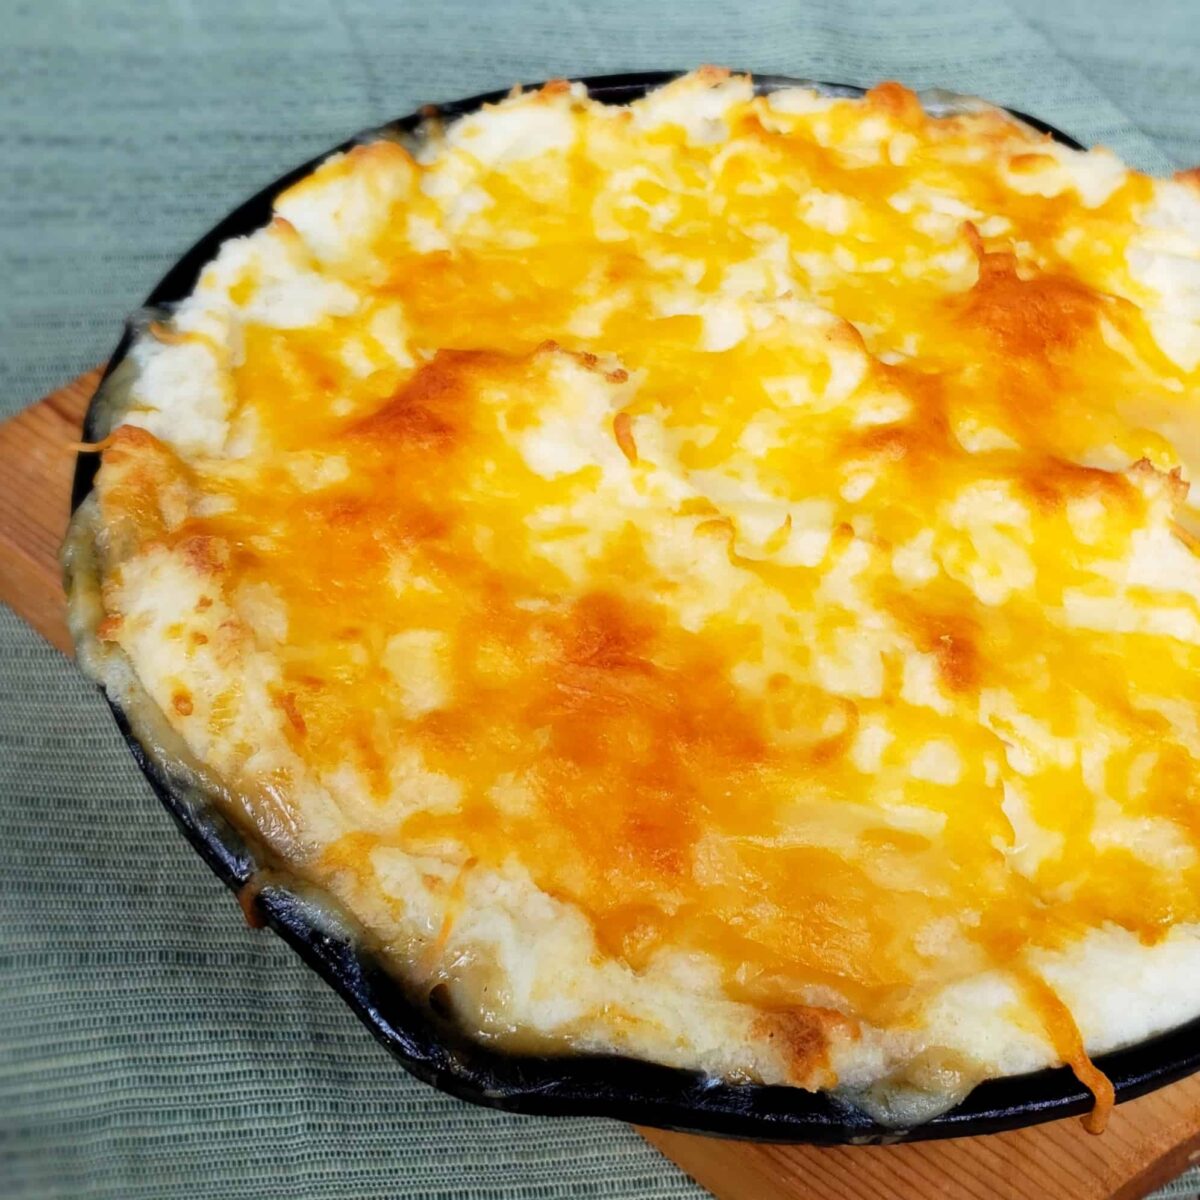 Turkey Shepherds Pie baked in a cast iron skillet and place on an orange towel topped with cheese.